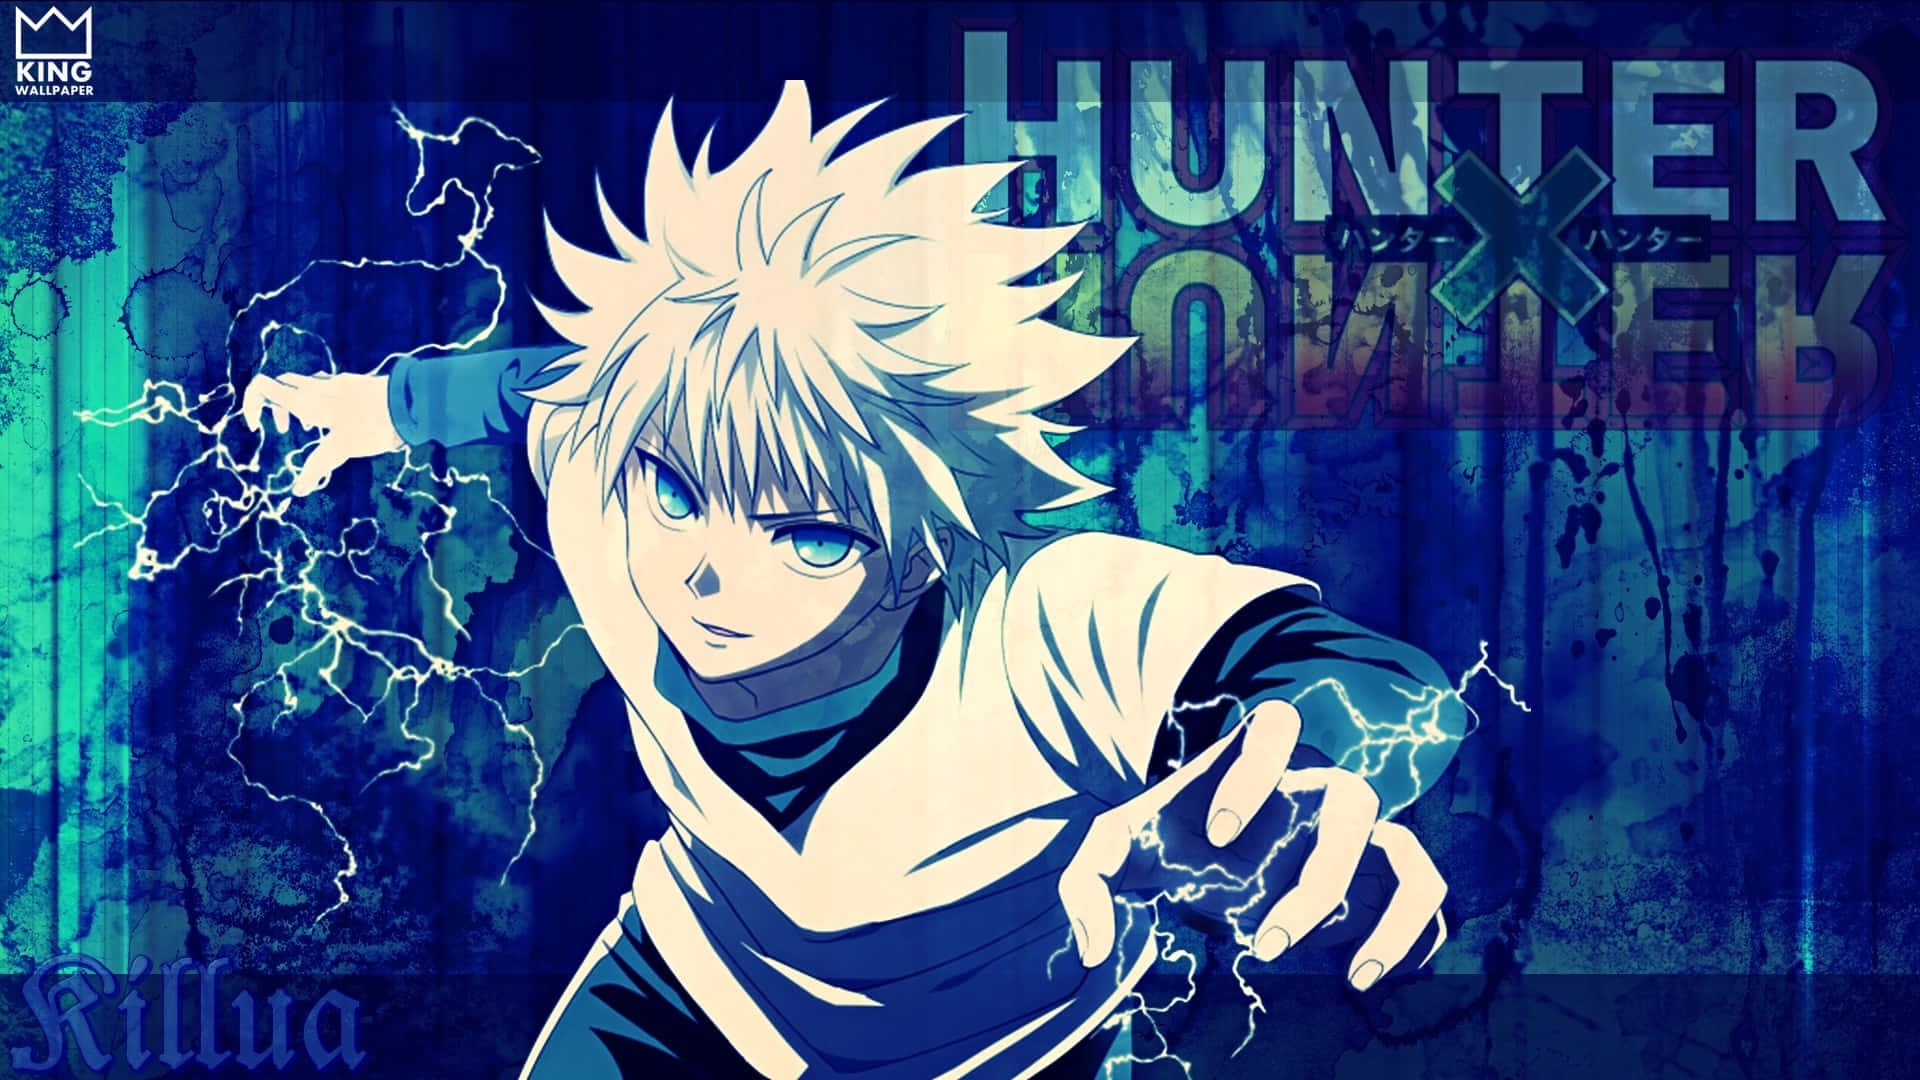 Show your admiration for the Hunter X Hunter Series with this stylish laptop. Wallpaper